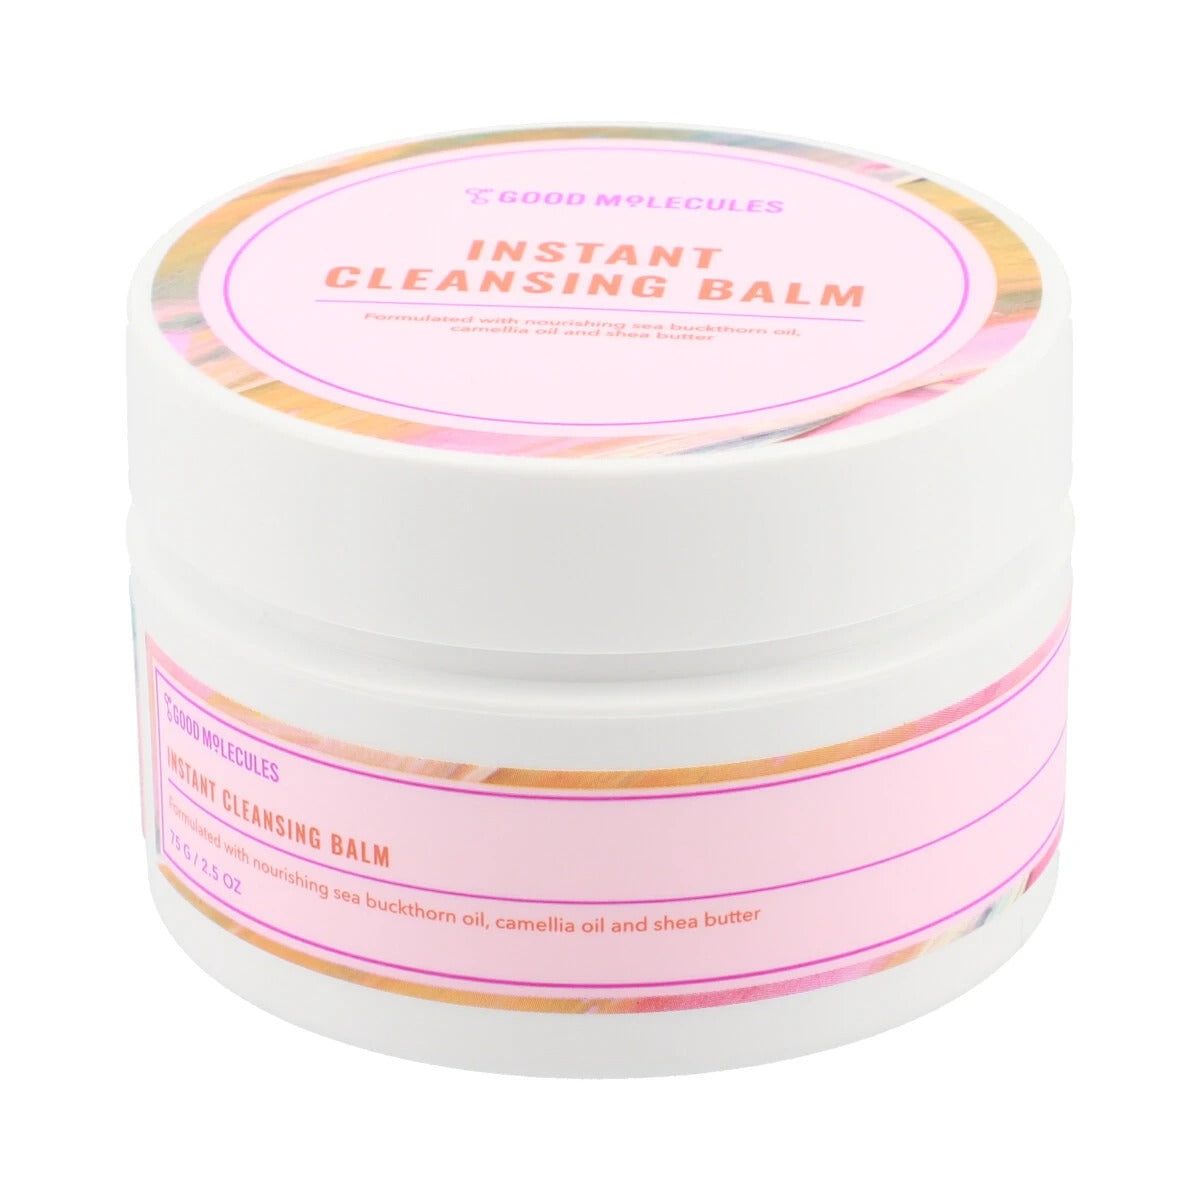 INSTANT CLEANSING BALM 75g